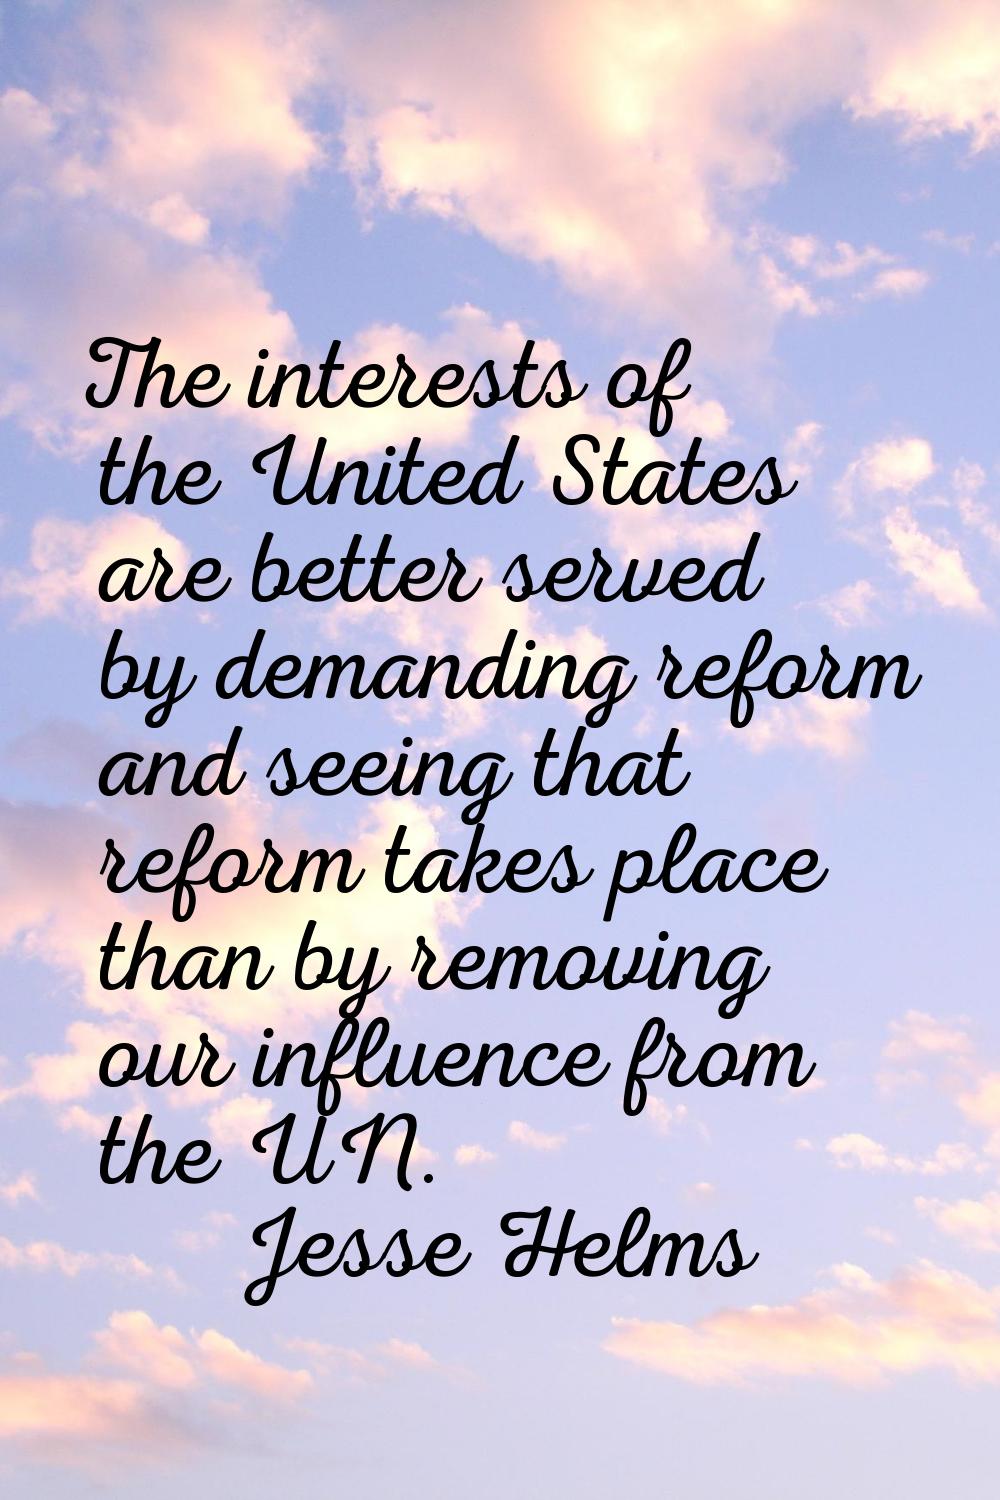 The interests of the United States are better served by demanding reform and seeing that reform tak